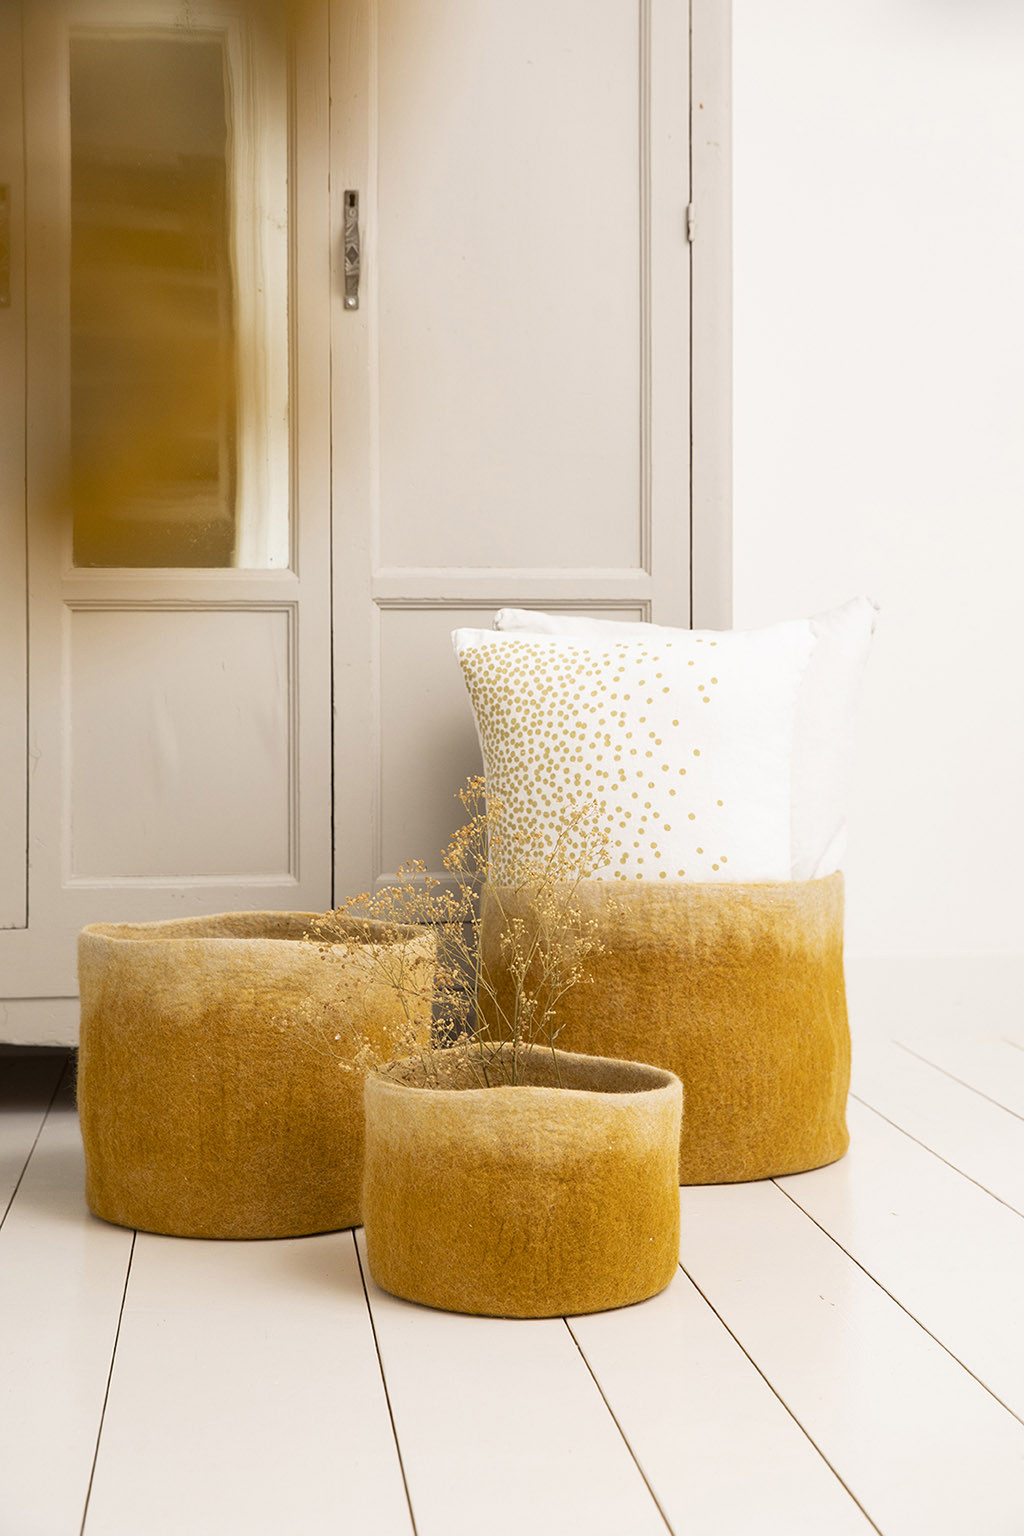 two-colored storage baskets to decorate your home with felt